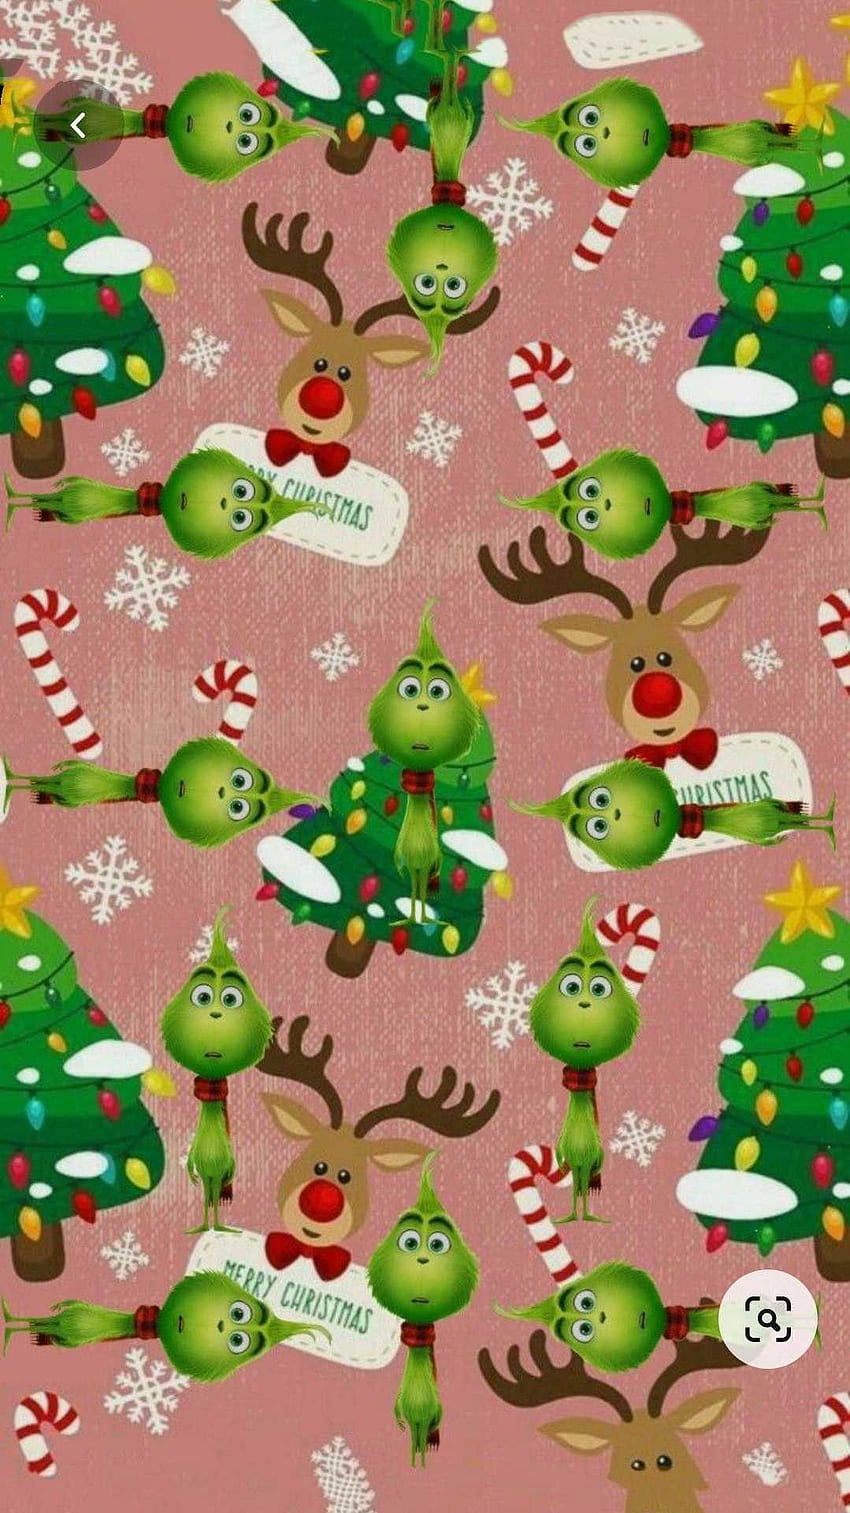 What Is This Grinch In Christmas Background Cute Grinch Picture Background  Image And Wallpaper for Free Download